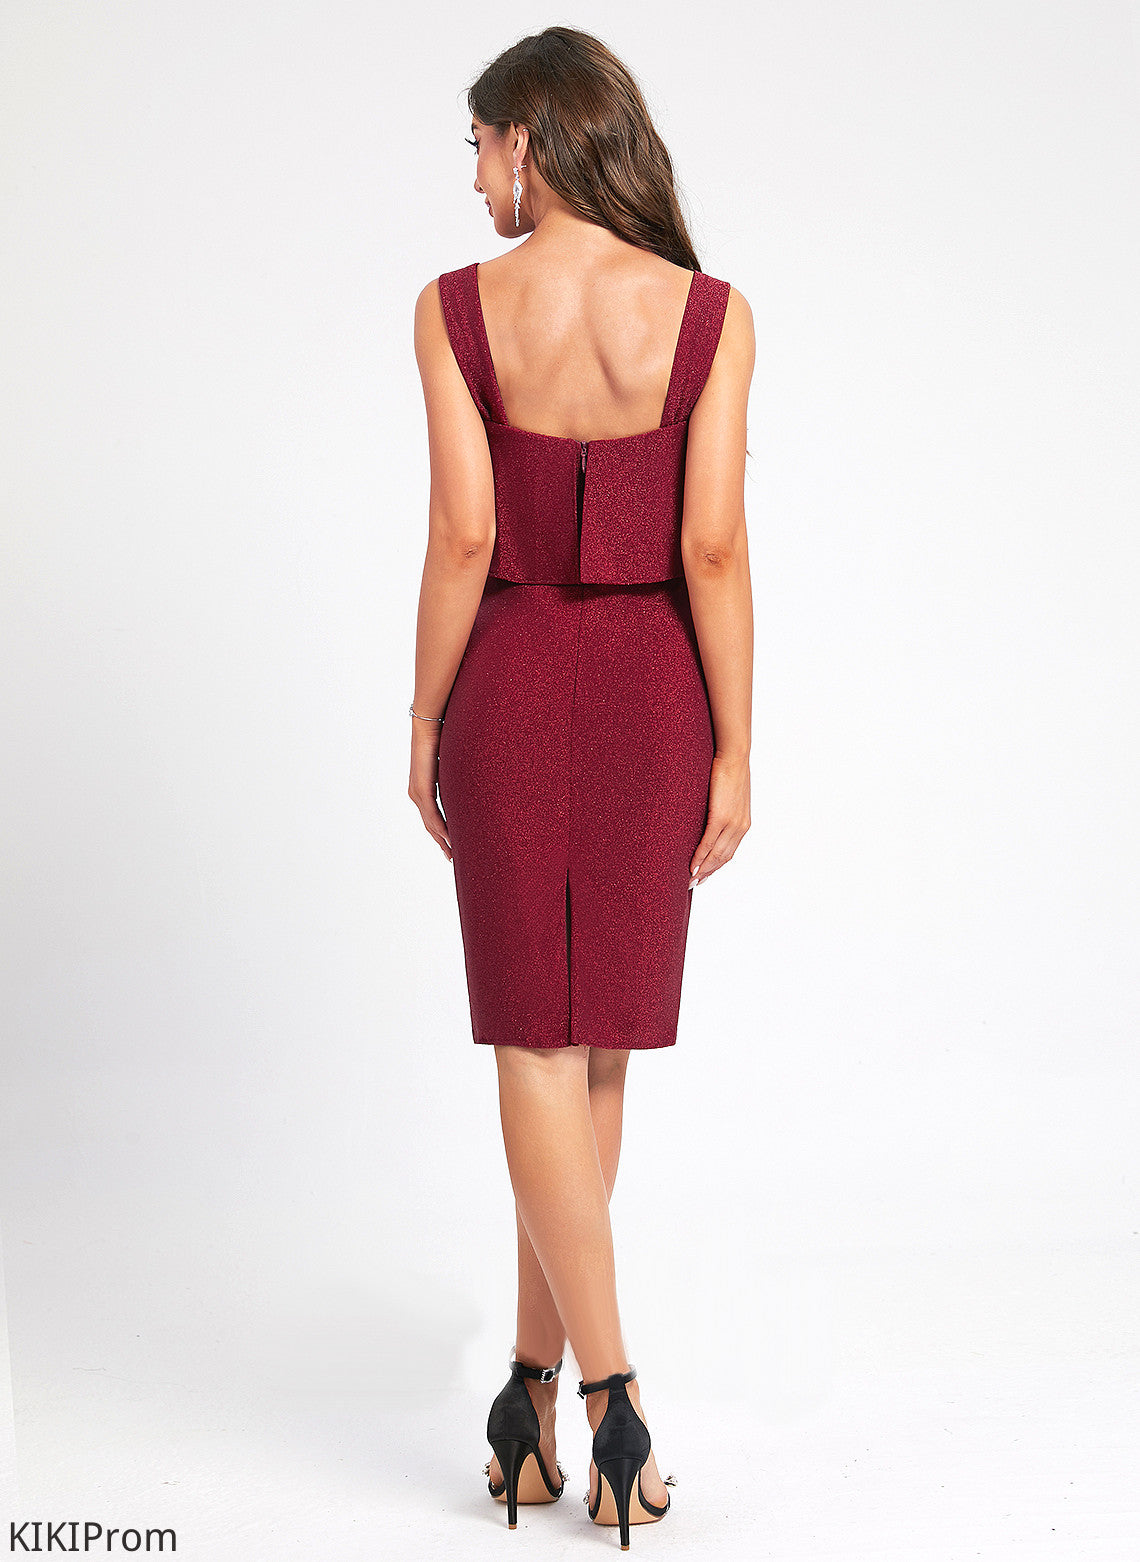 Square Dress With Knee-Length Cocktail Polyester Neckline Hortensia Cocktail Dresses Sheath/Column Ruffle